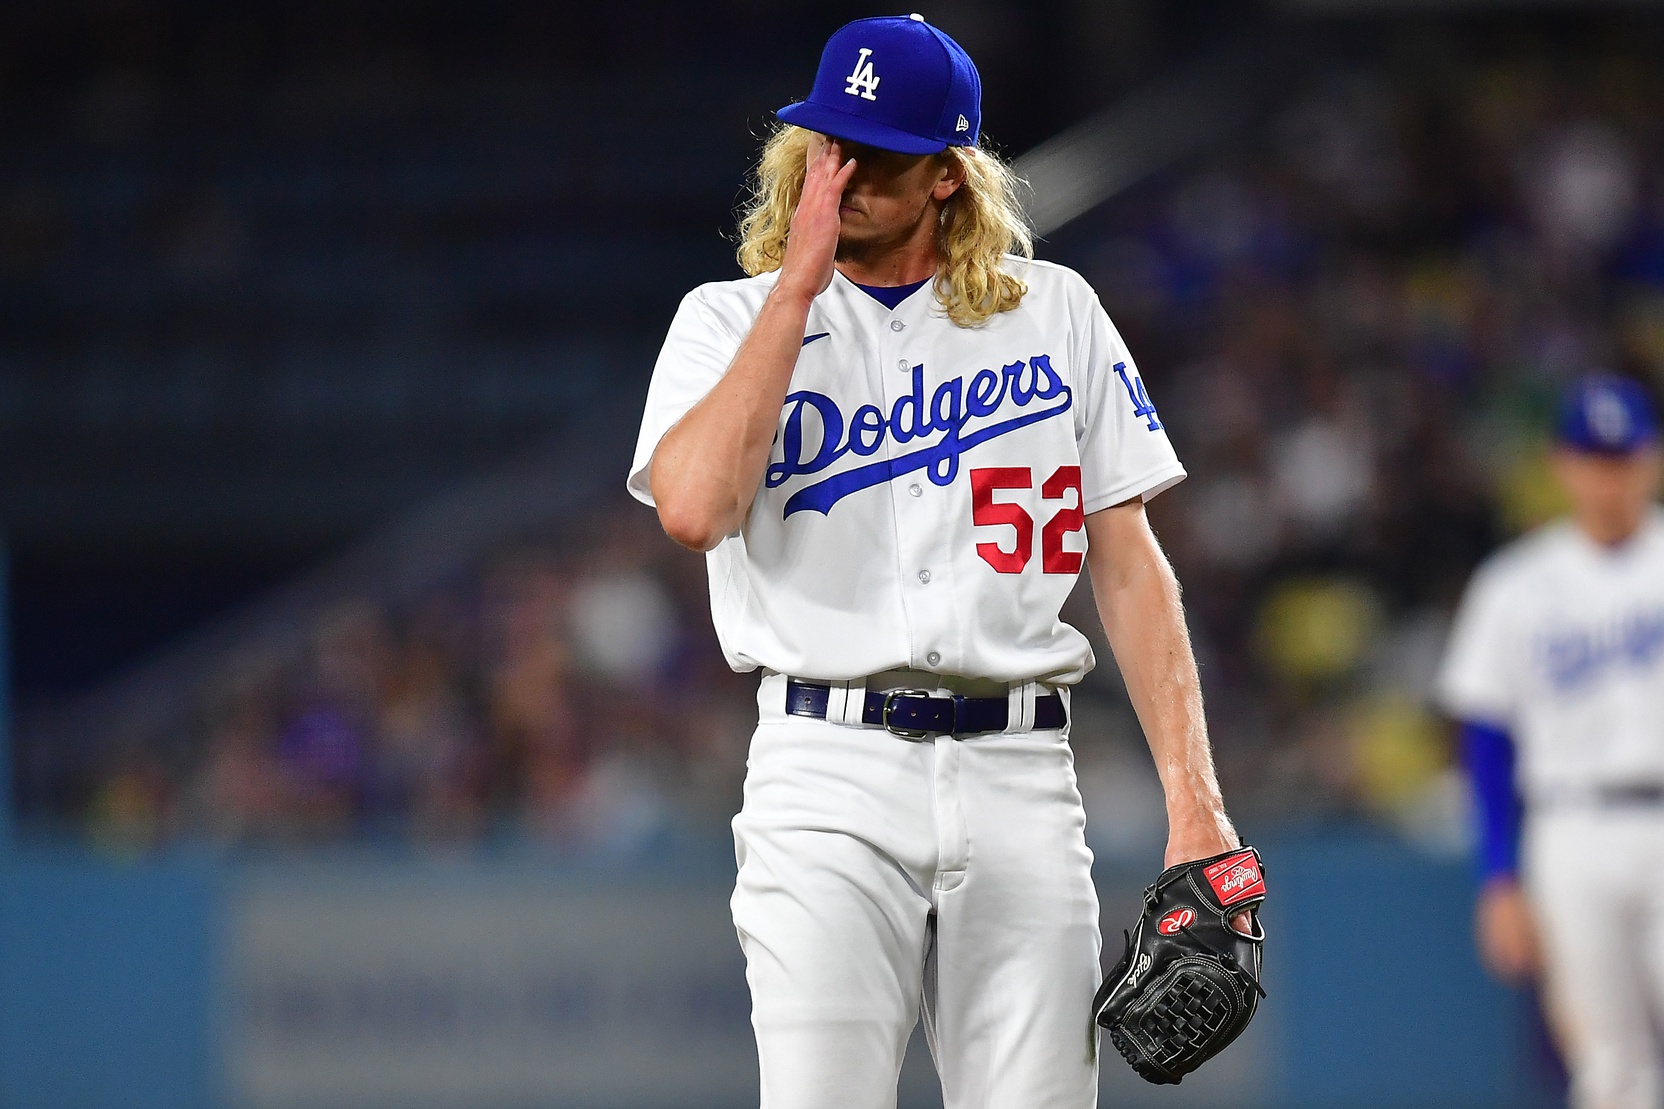 How the Dodgers' roster was built: 2 front offices, 12 trades